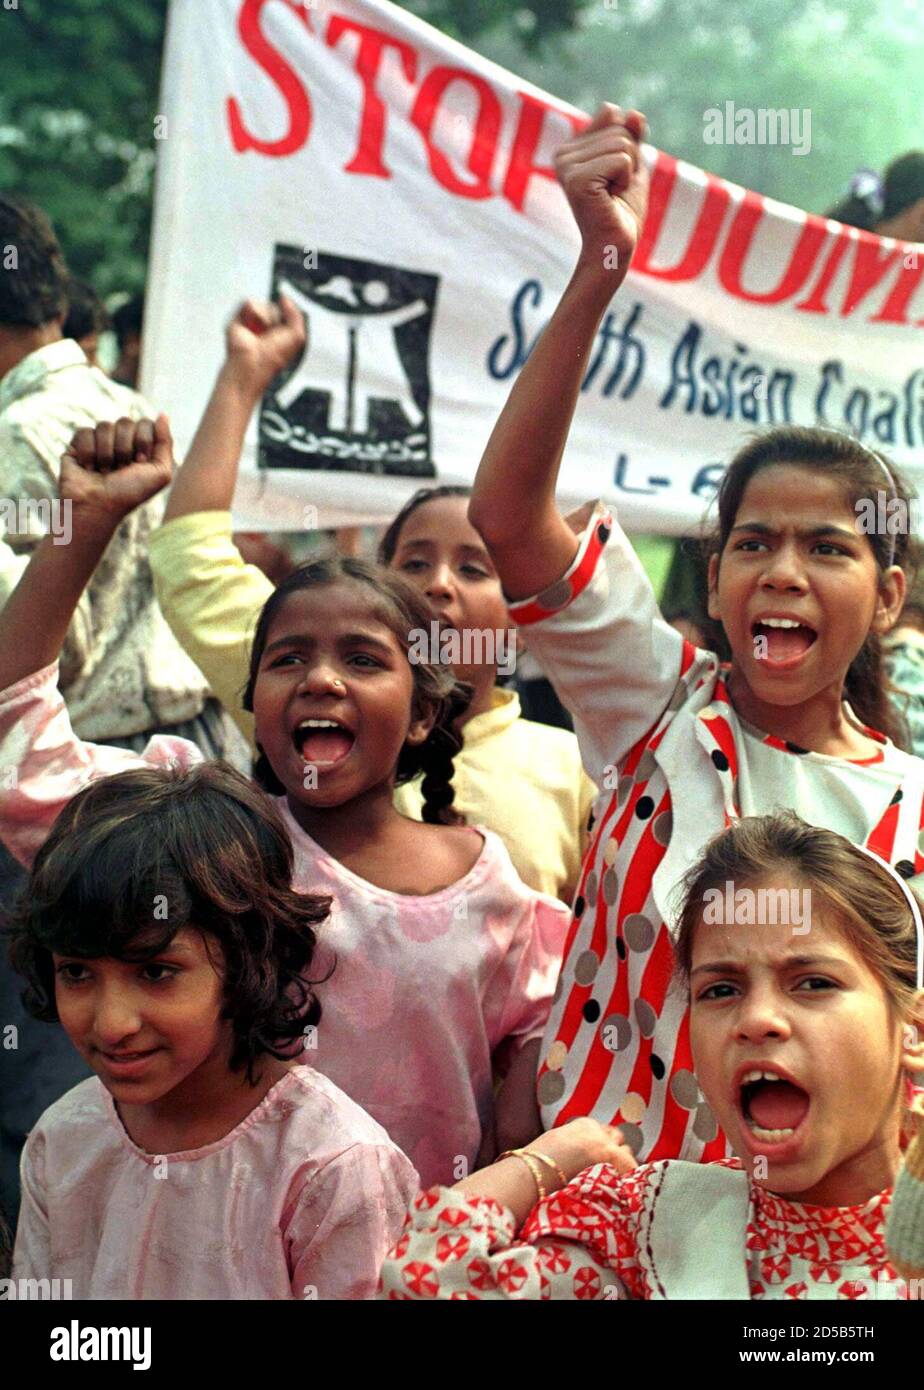 Indian Child Labourers Shout Slogans For Abolition Of Child Labour During A Rally In New Delhi November More Than 0 Child Labourers And Schoolchildren Took Part In The Rally And Formed